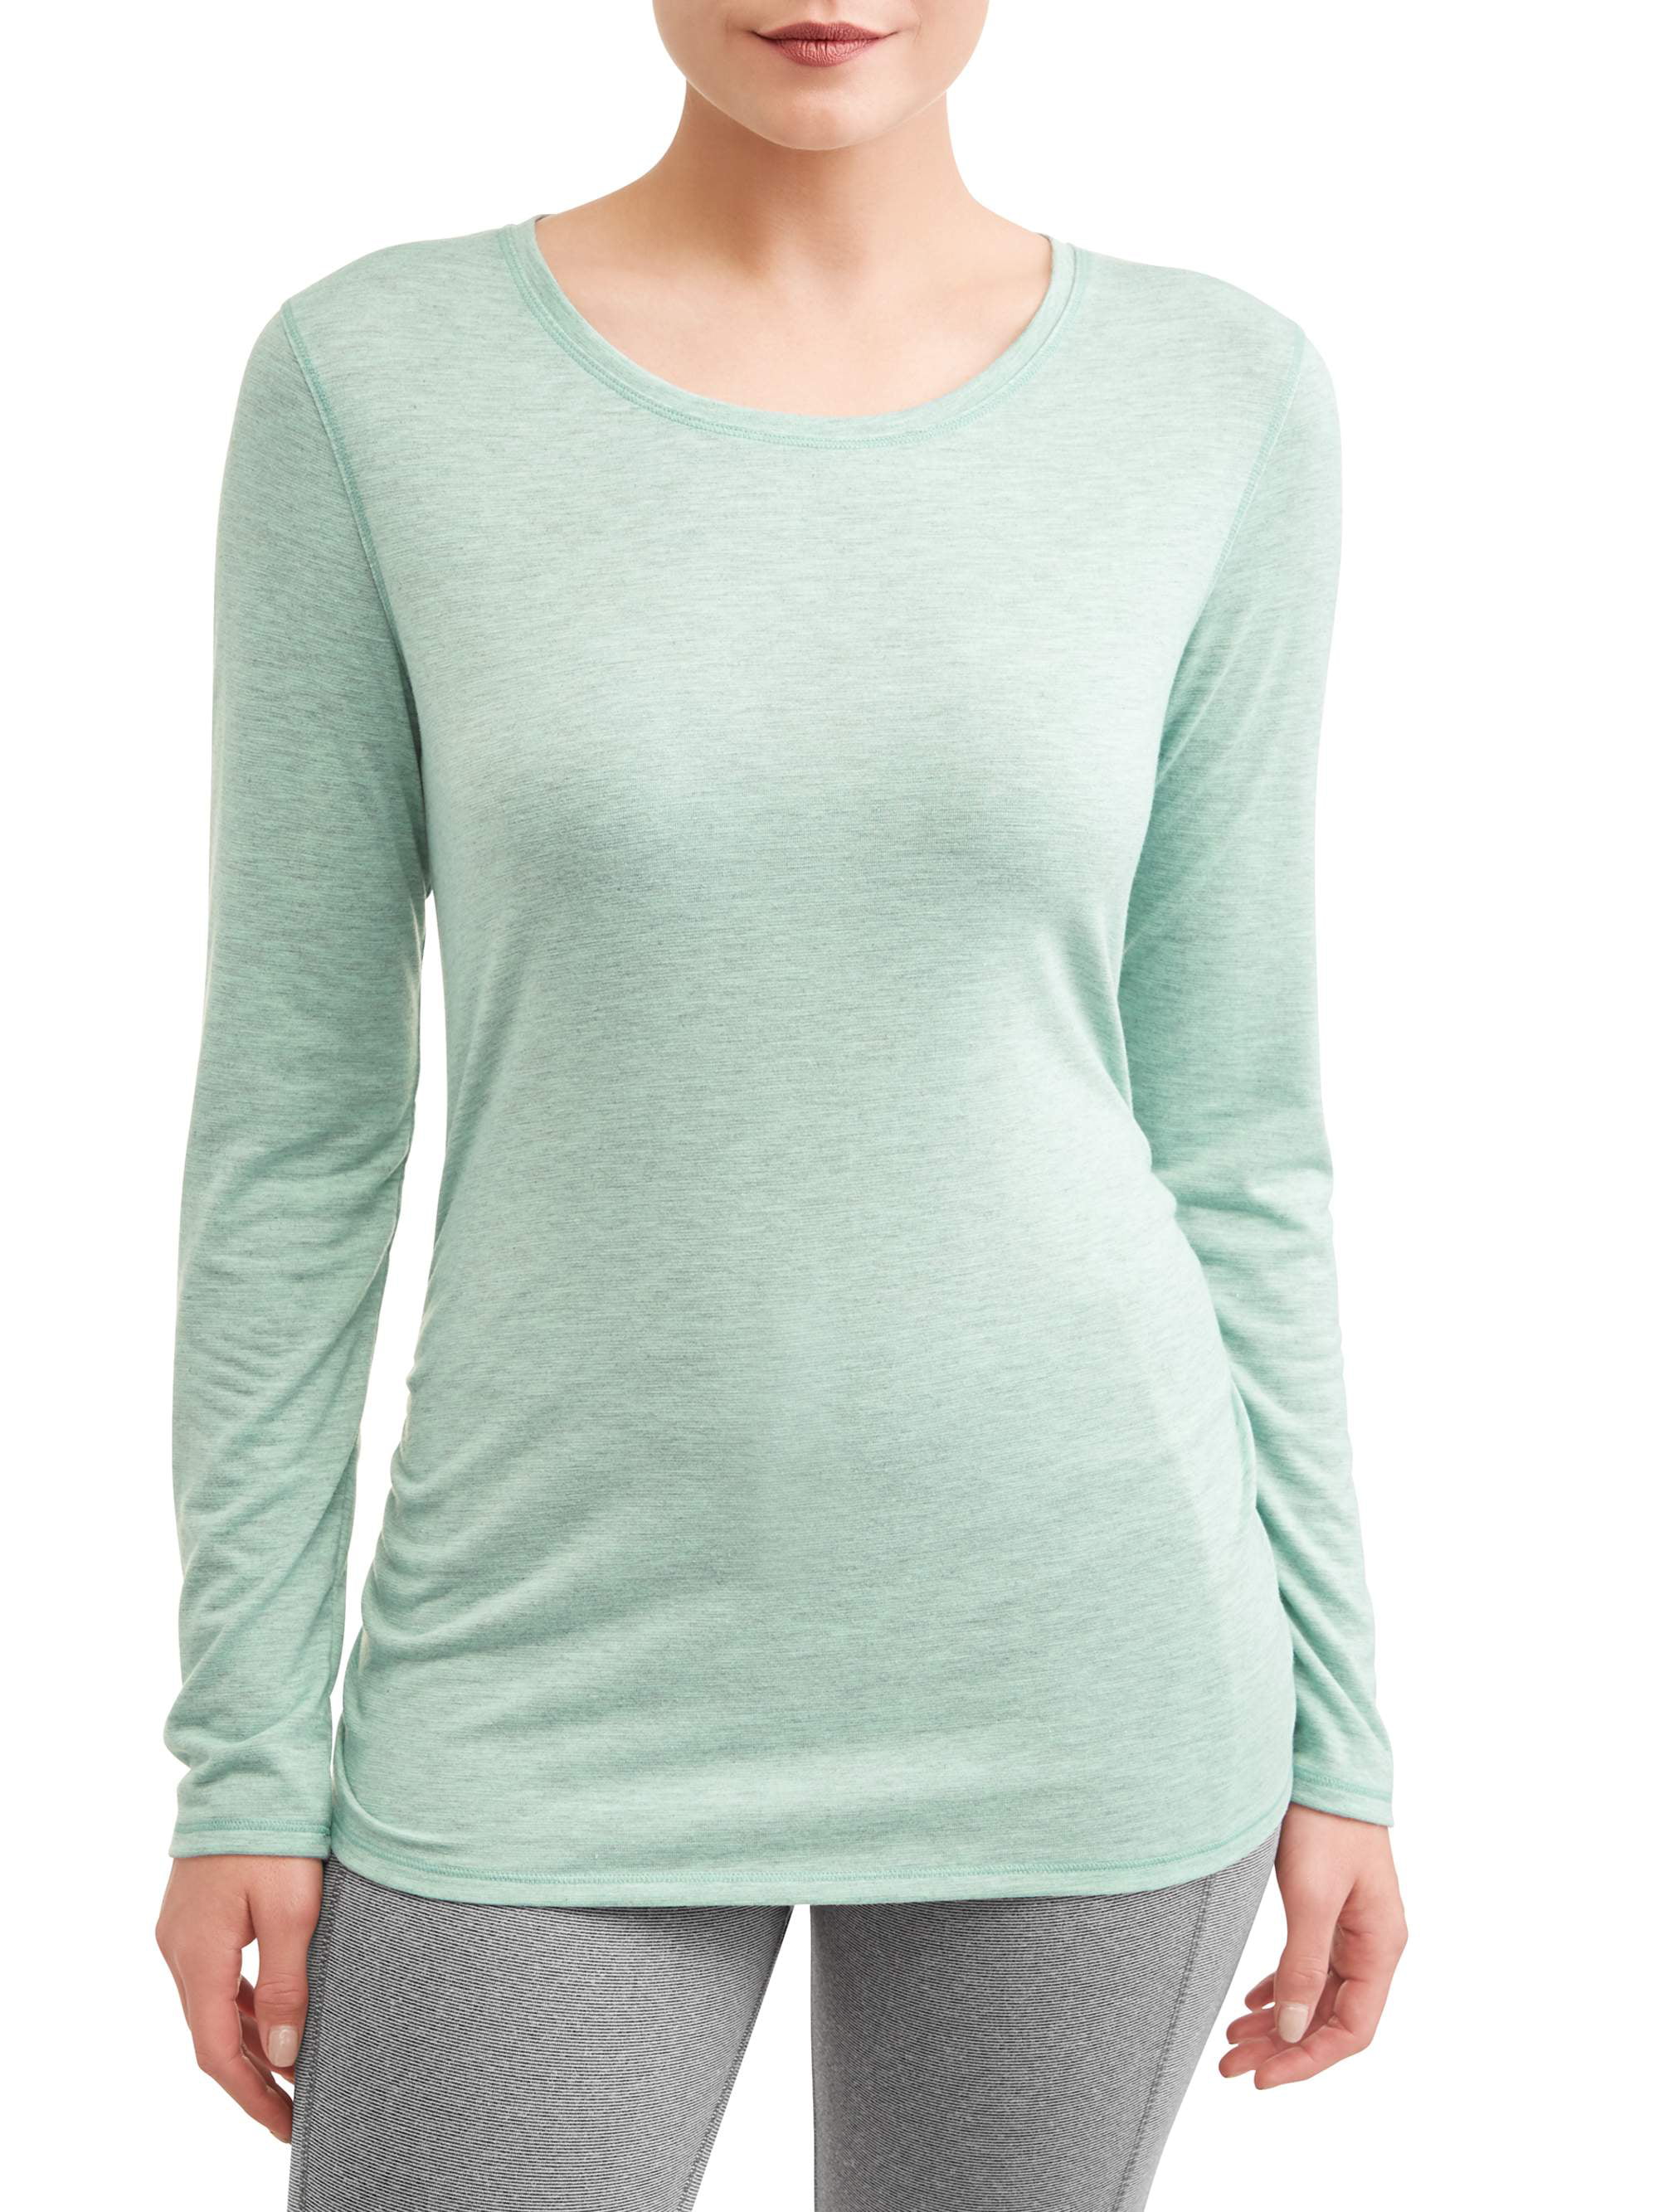 Athletic Works Women's Athleisure Ruched Long Sleeve Tee - Walmart.com